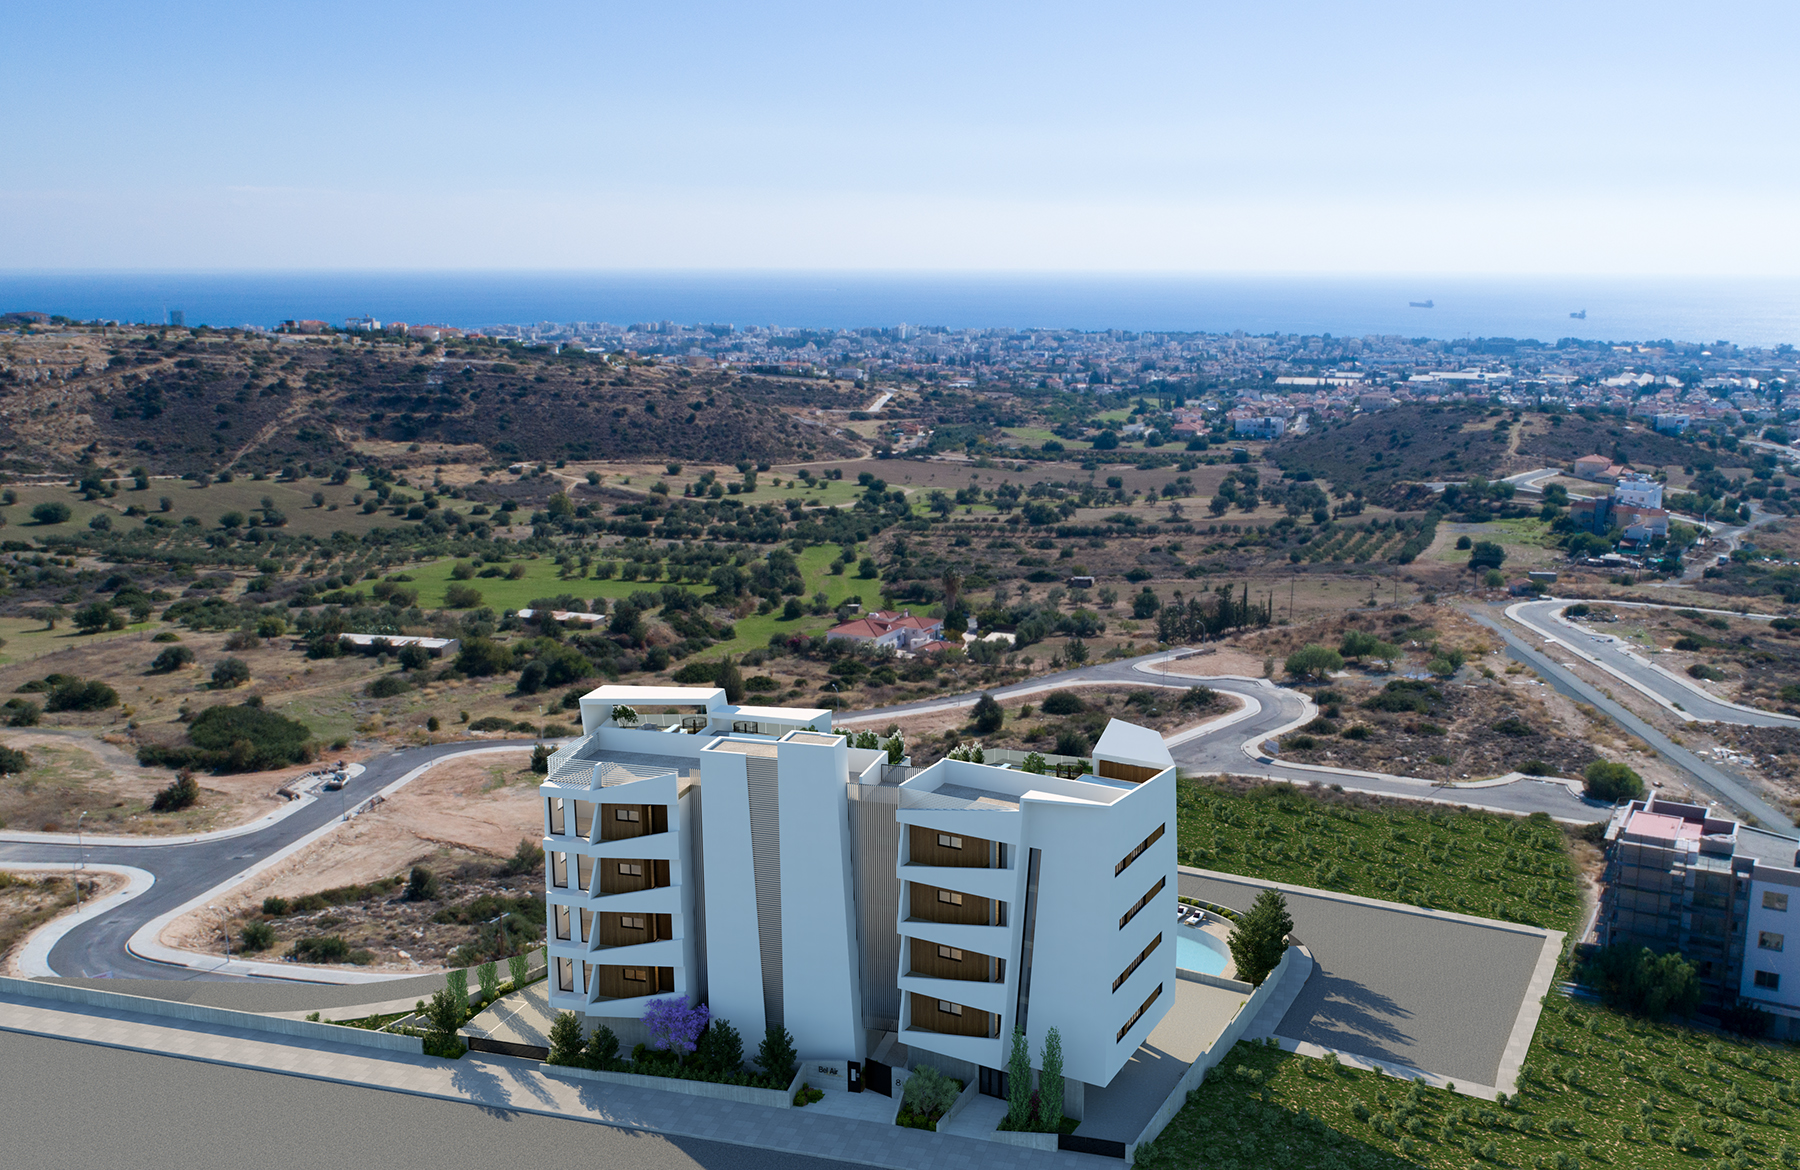 Luxurious Apartments in Germasogeia